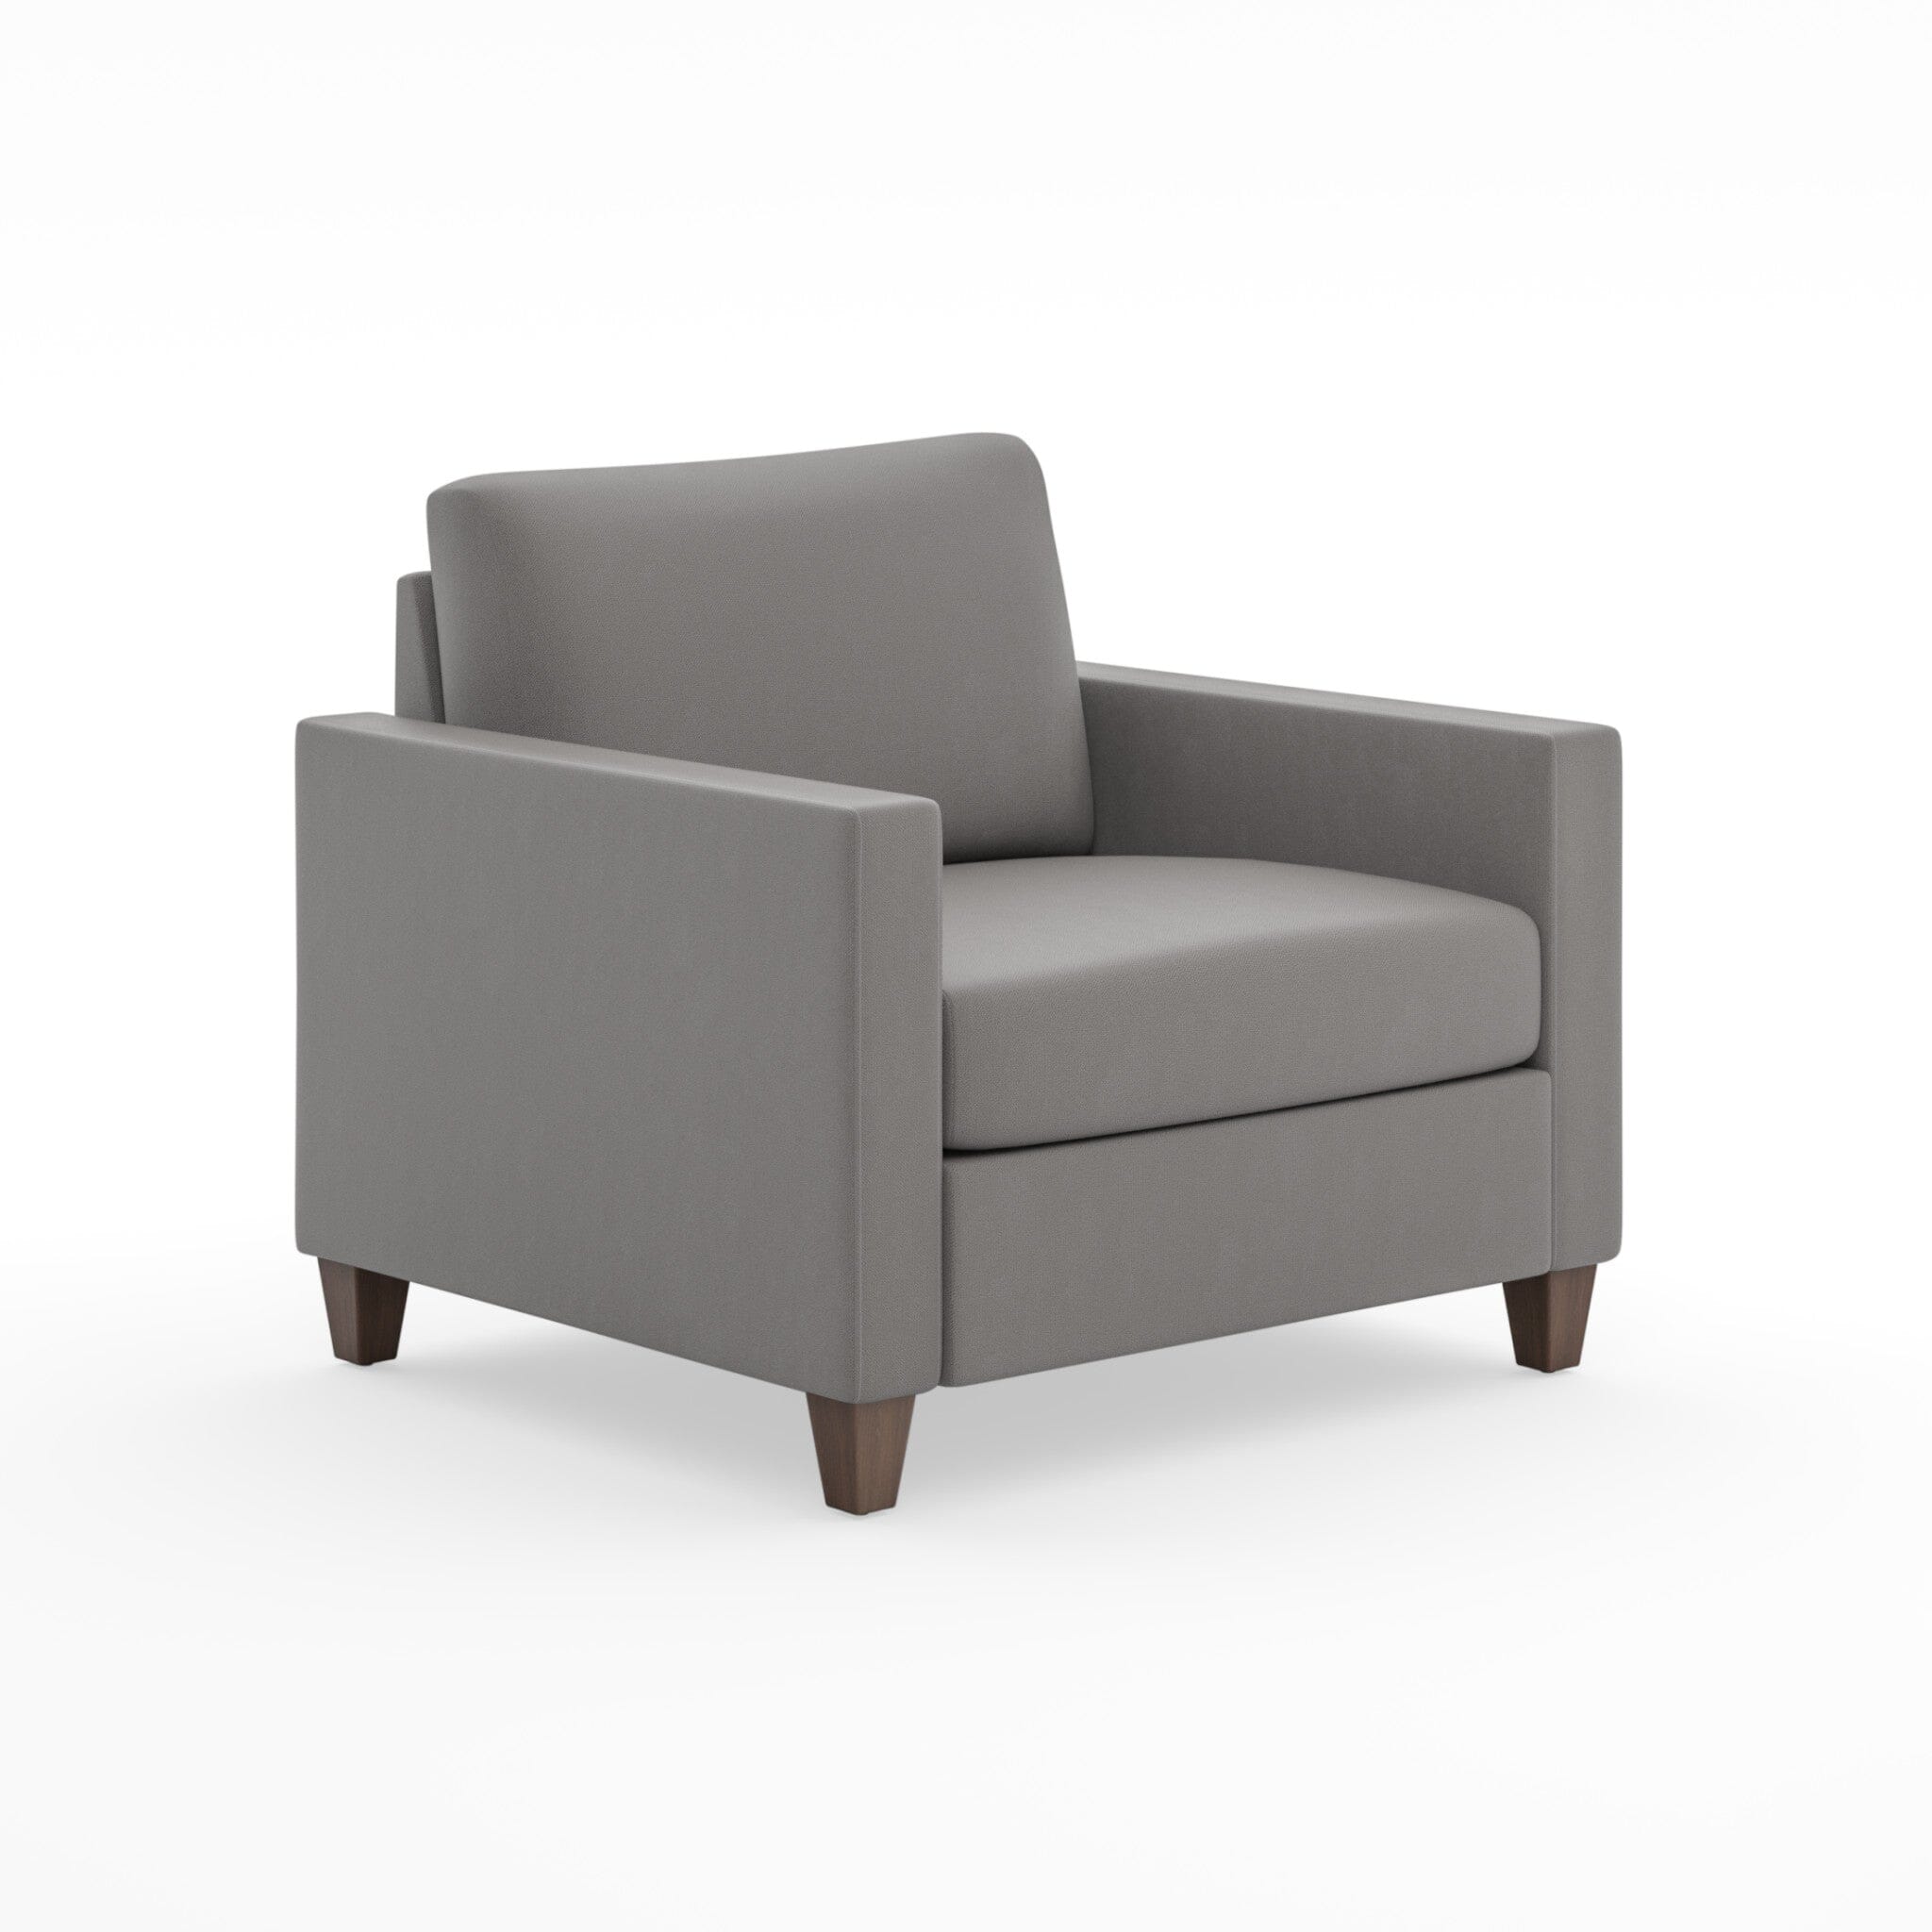 Transitional Armchair By Dylan Chair Dylan